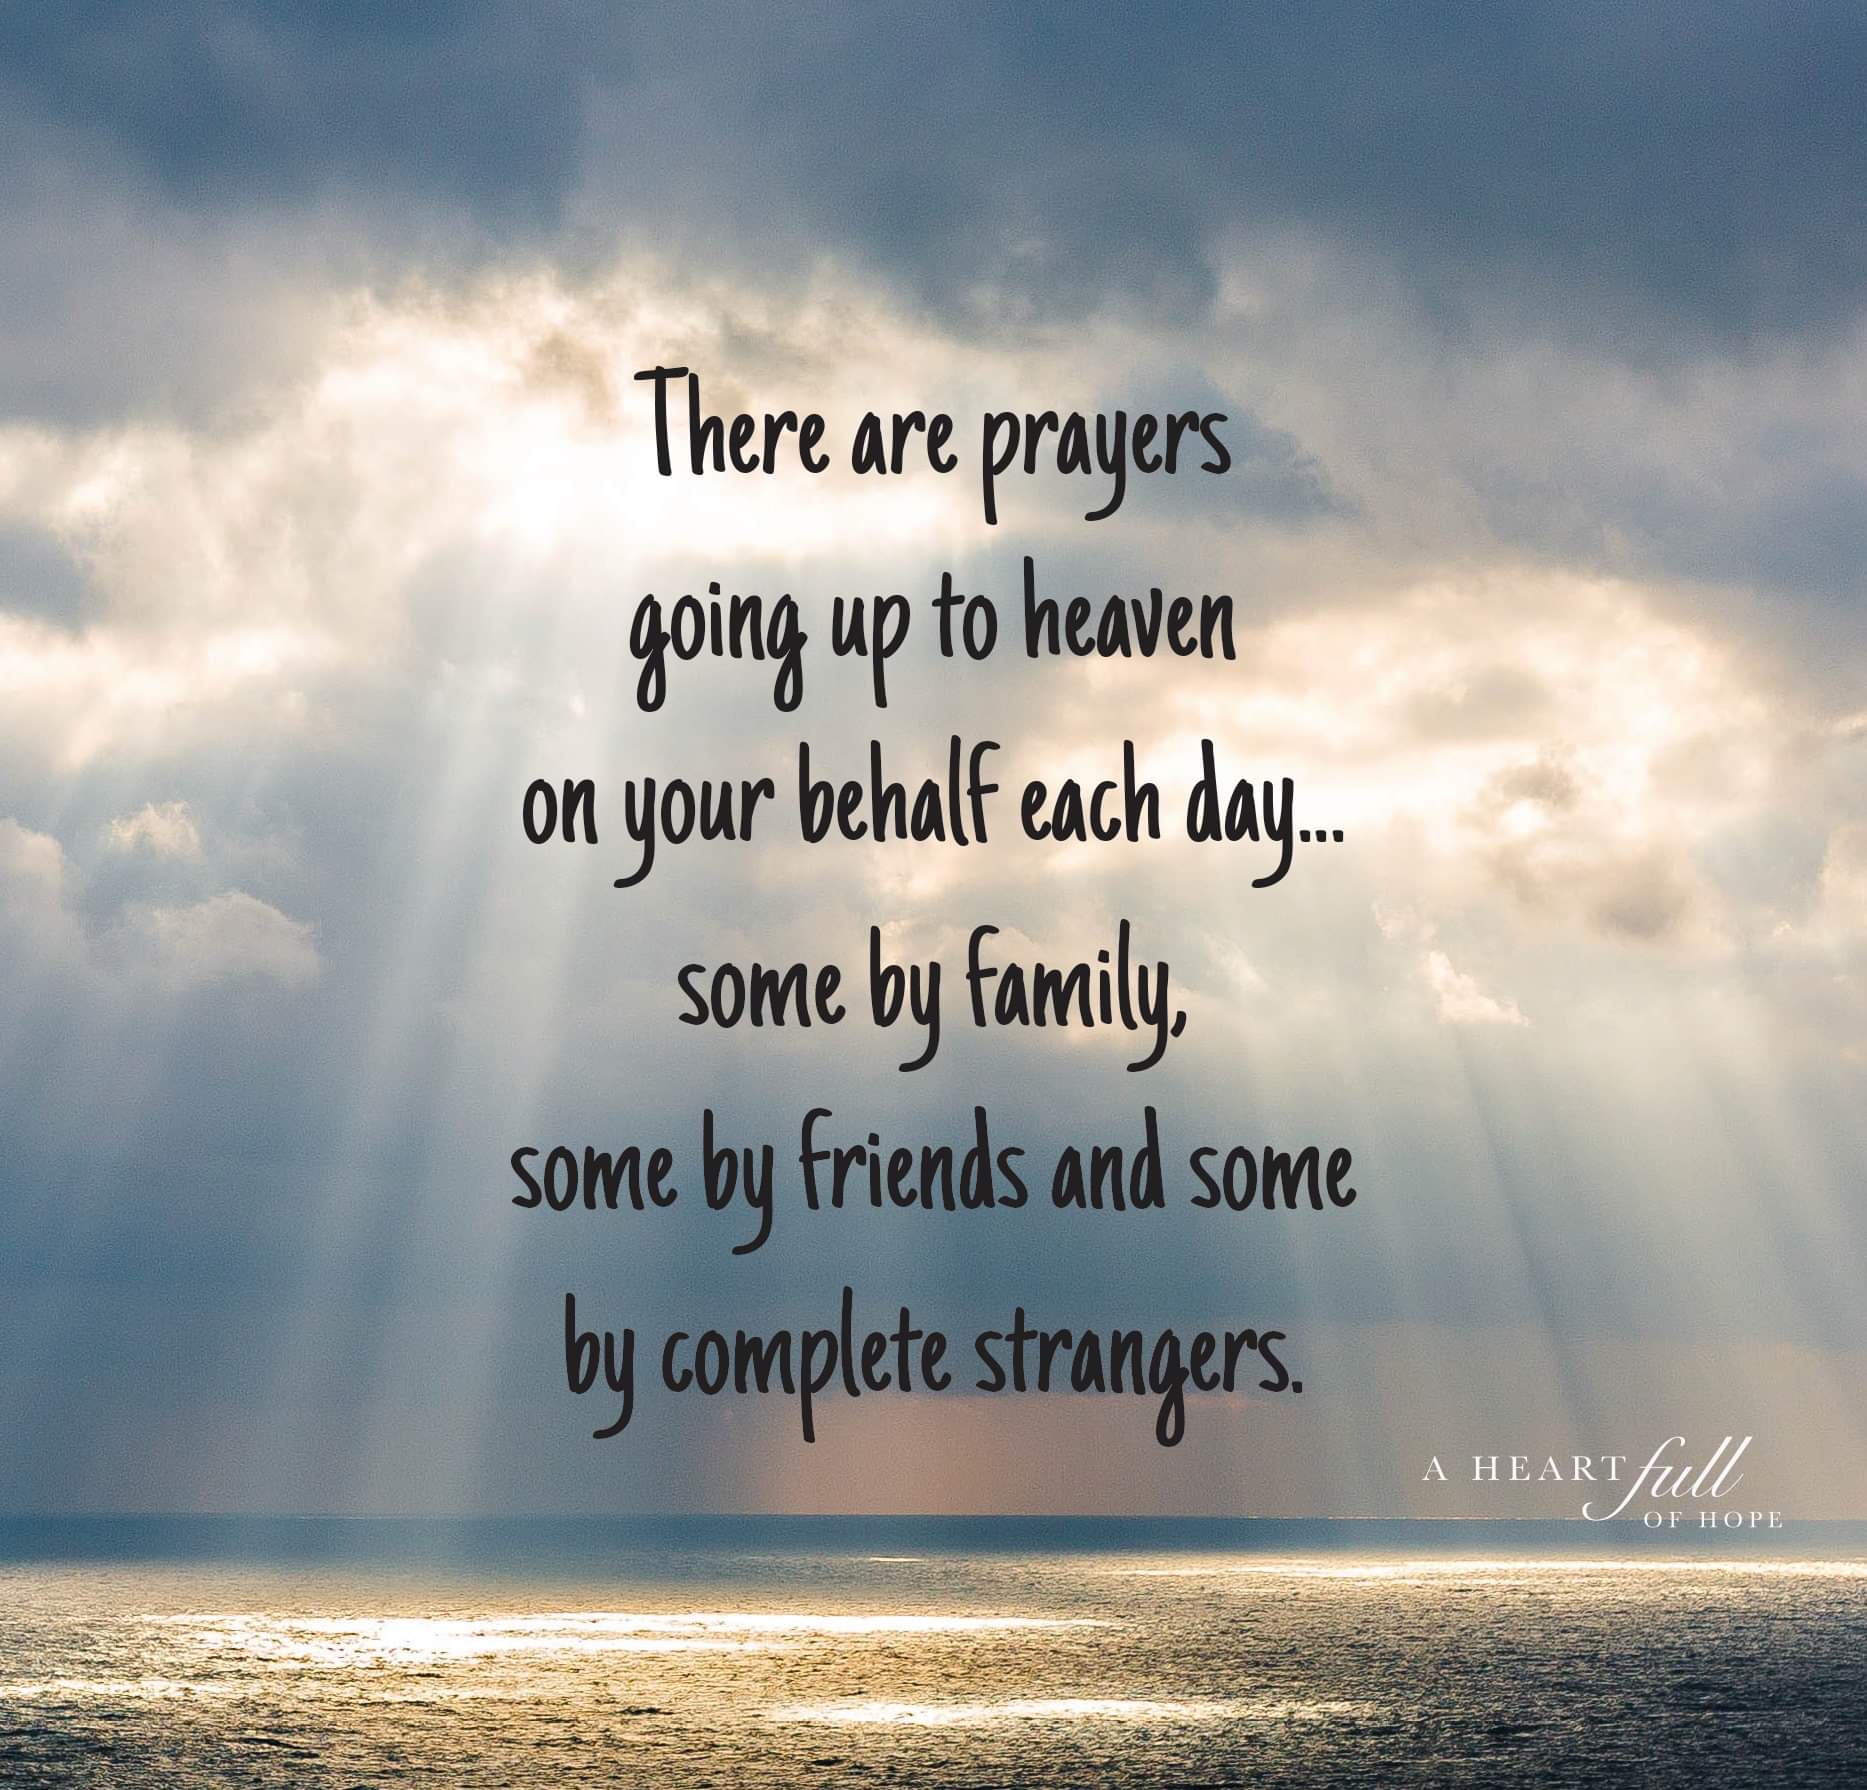 Strangers are praying for you right now.